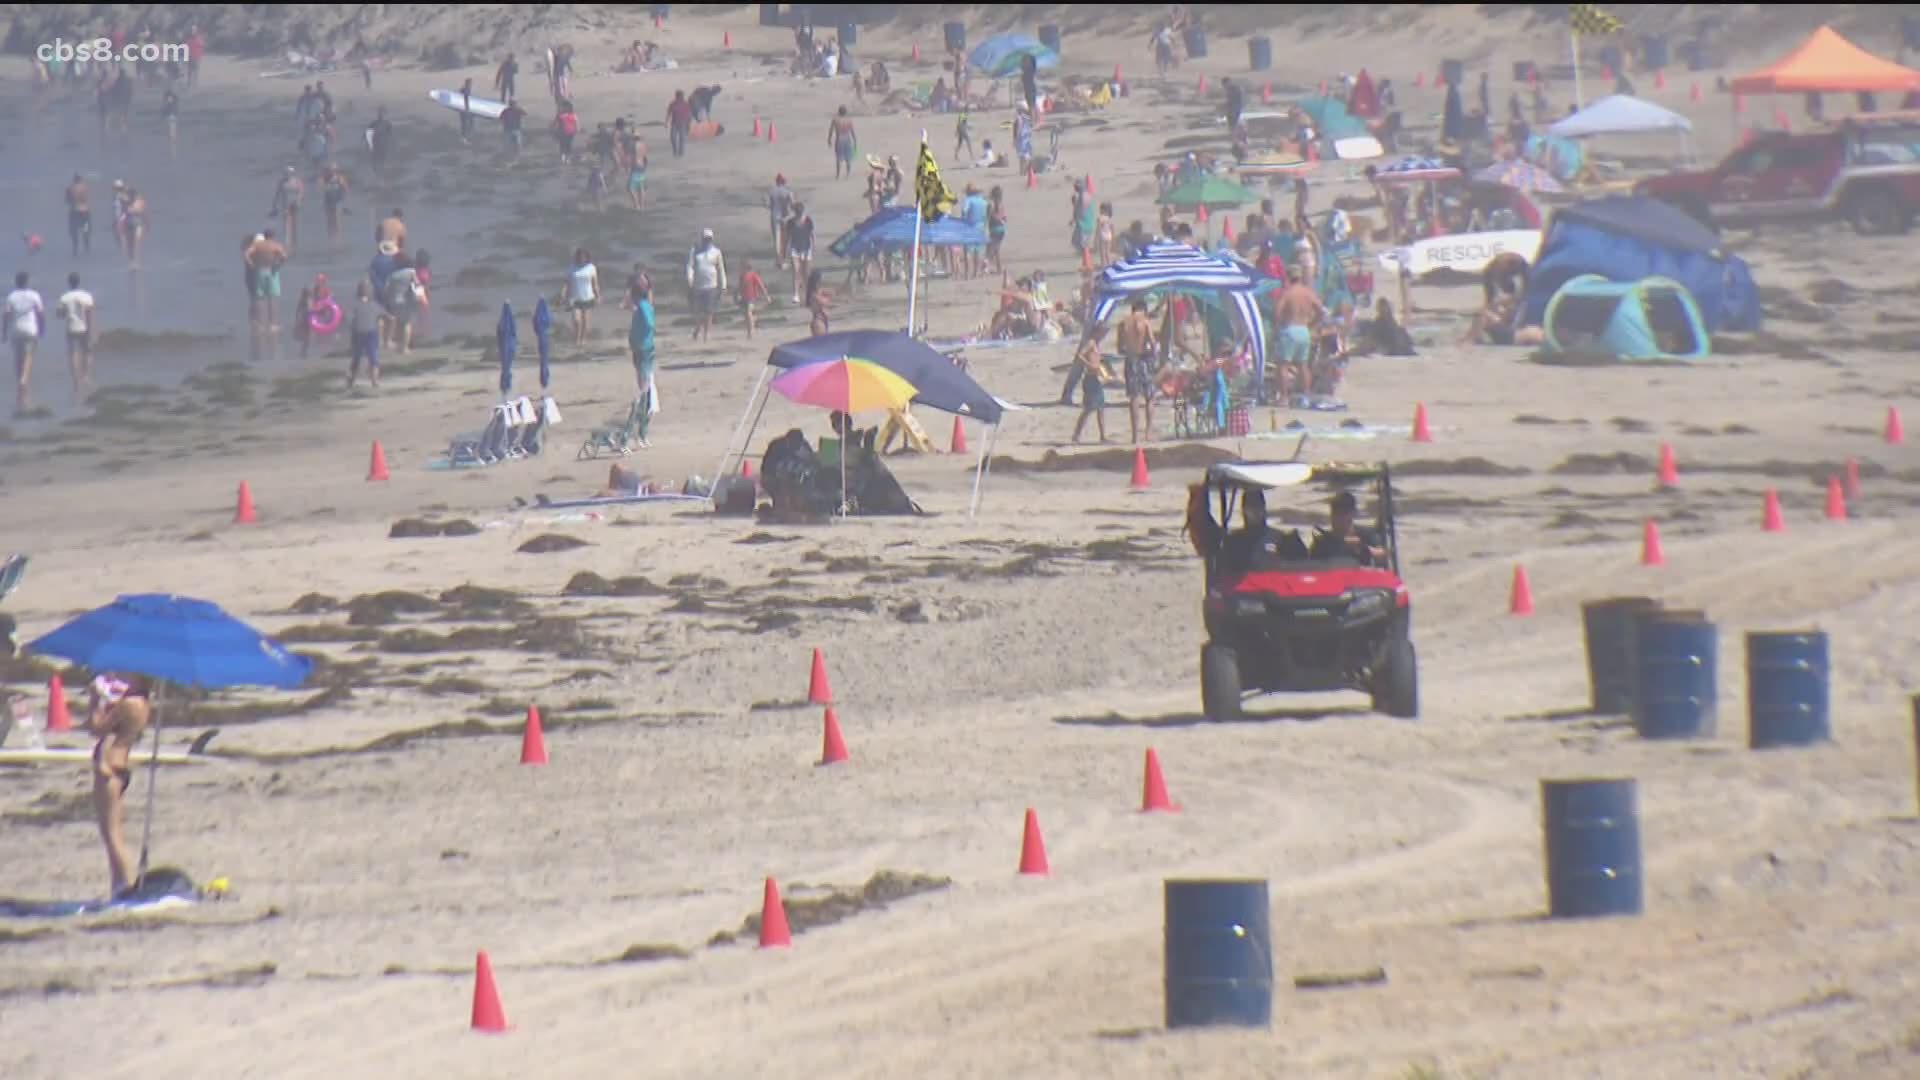 Despite smaller crowds, the number of rescues increased. Last year, San Diego lifeguards made 230 water rescues, this year they made close to 380.